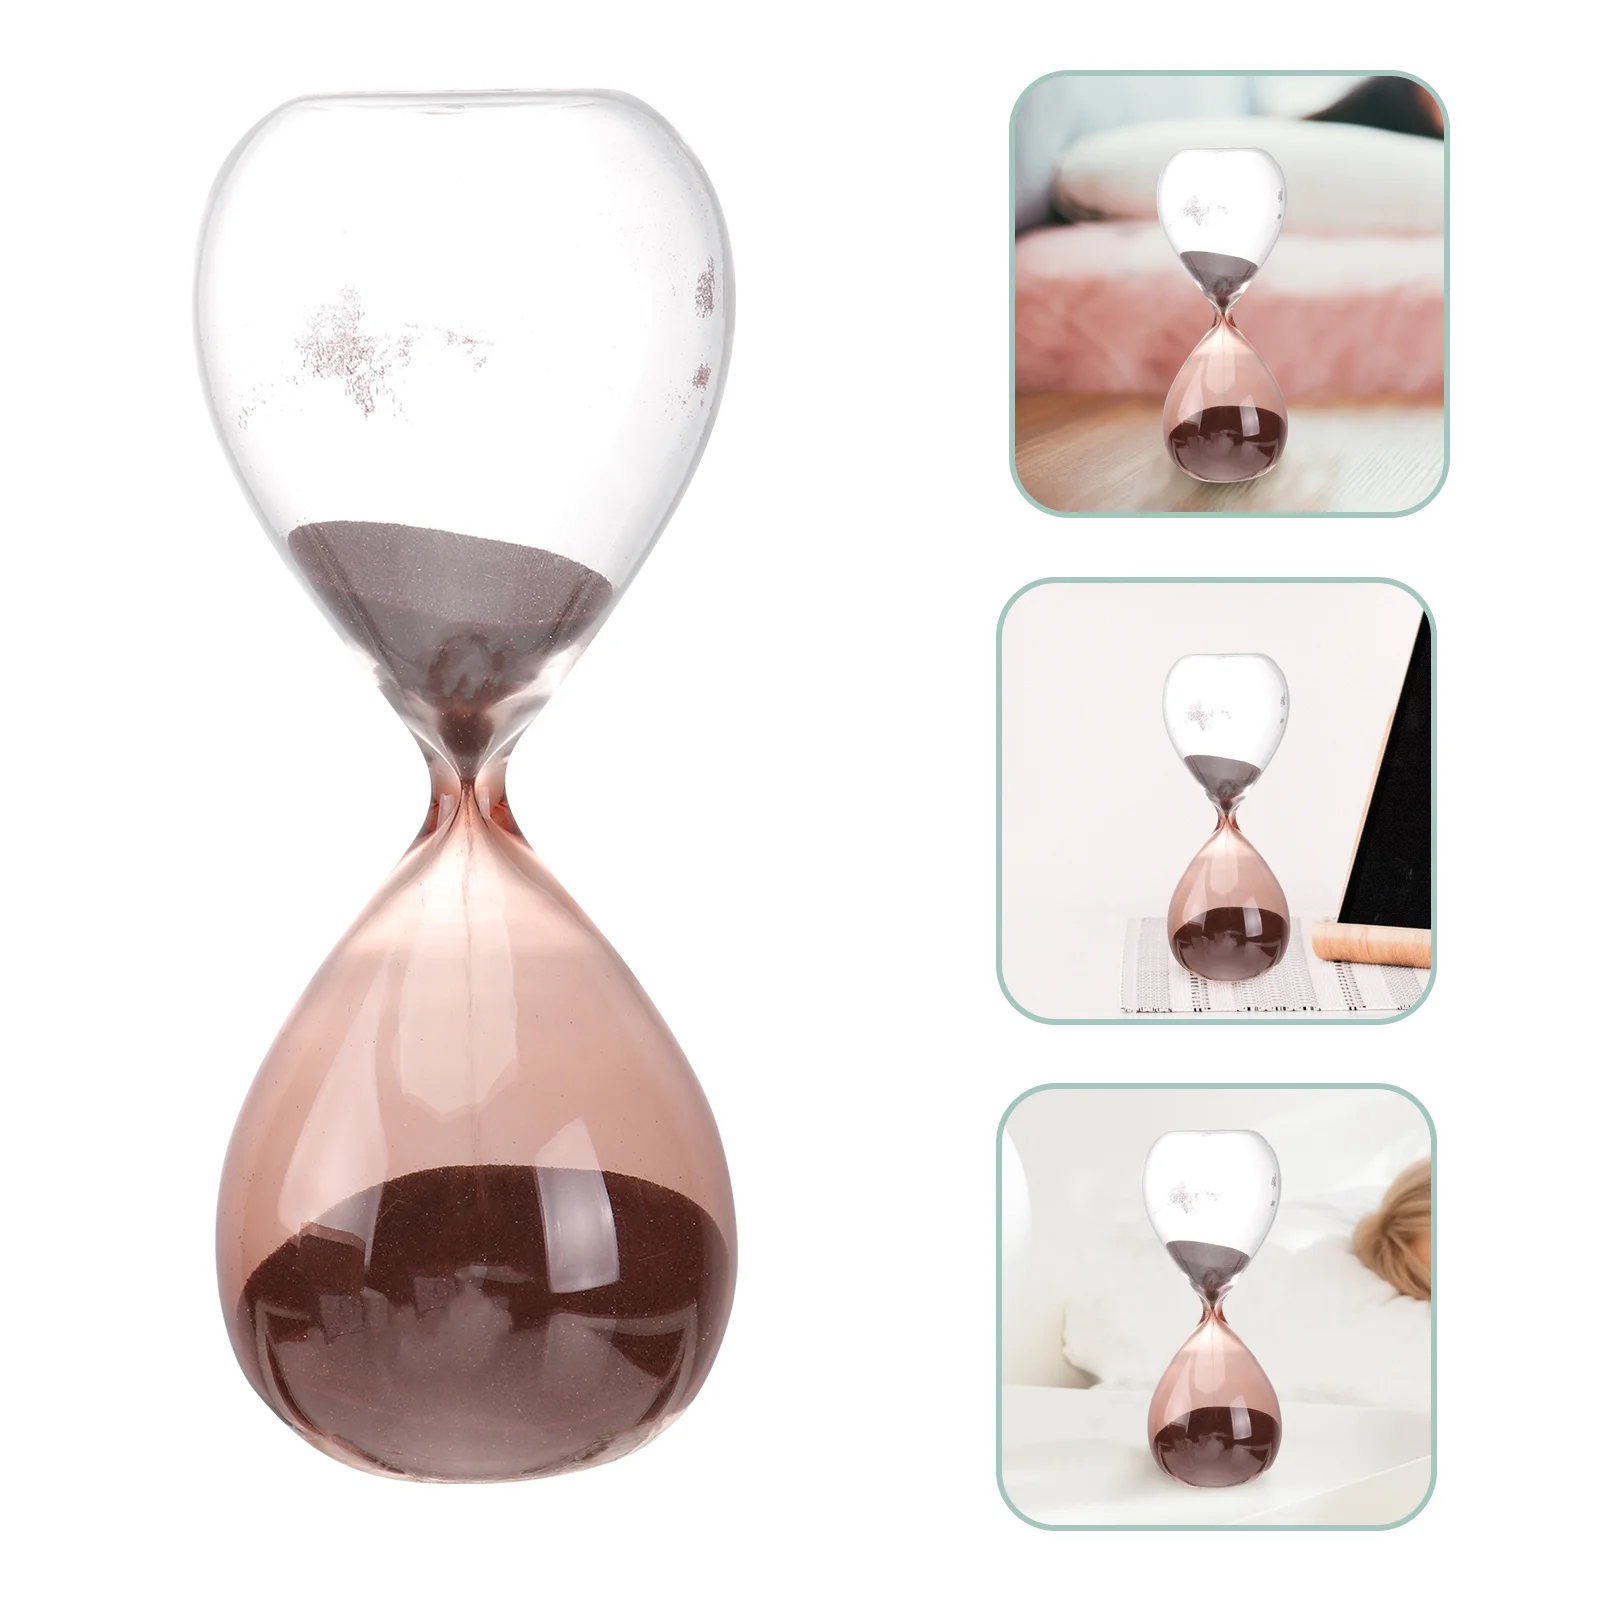 

Timer Hourglass Sand Glass Minute Decorative Decoration Minutes Decor Home Adornment Hour Sandglass Accurate Tabletop Digital